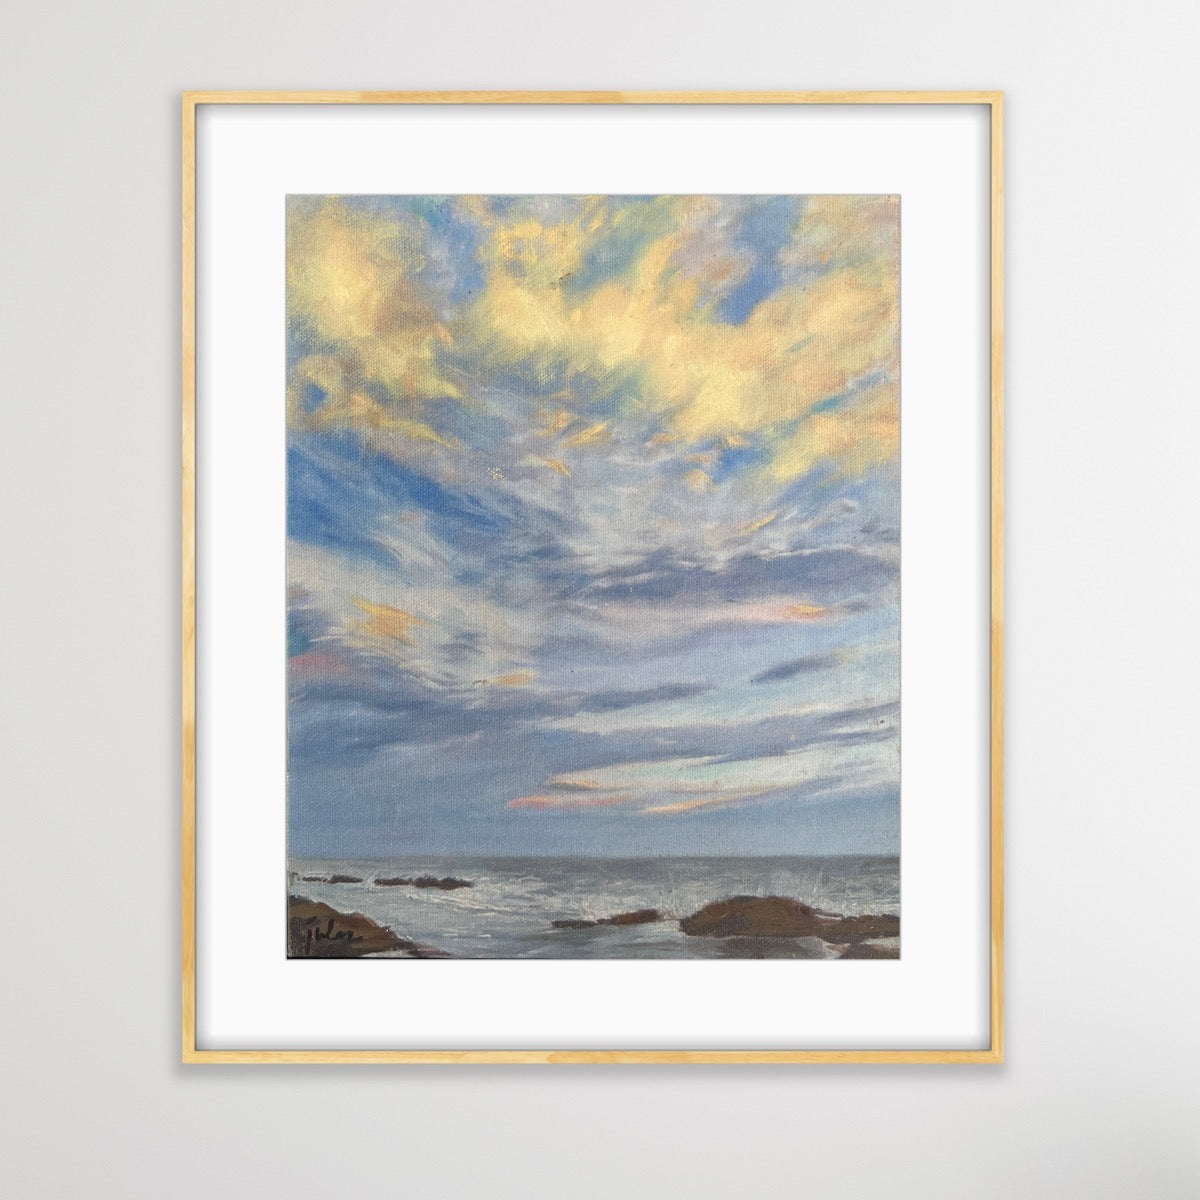 YELLOW CLOUDS AT DUSK - Giclee Reproduction Print of Original Oil Painting